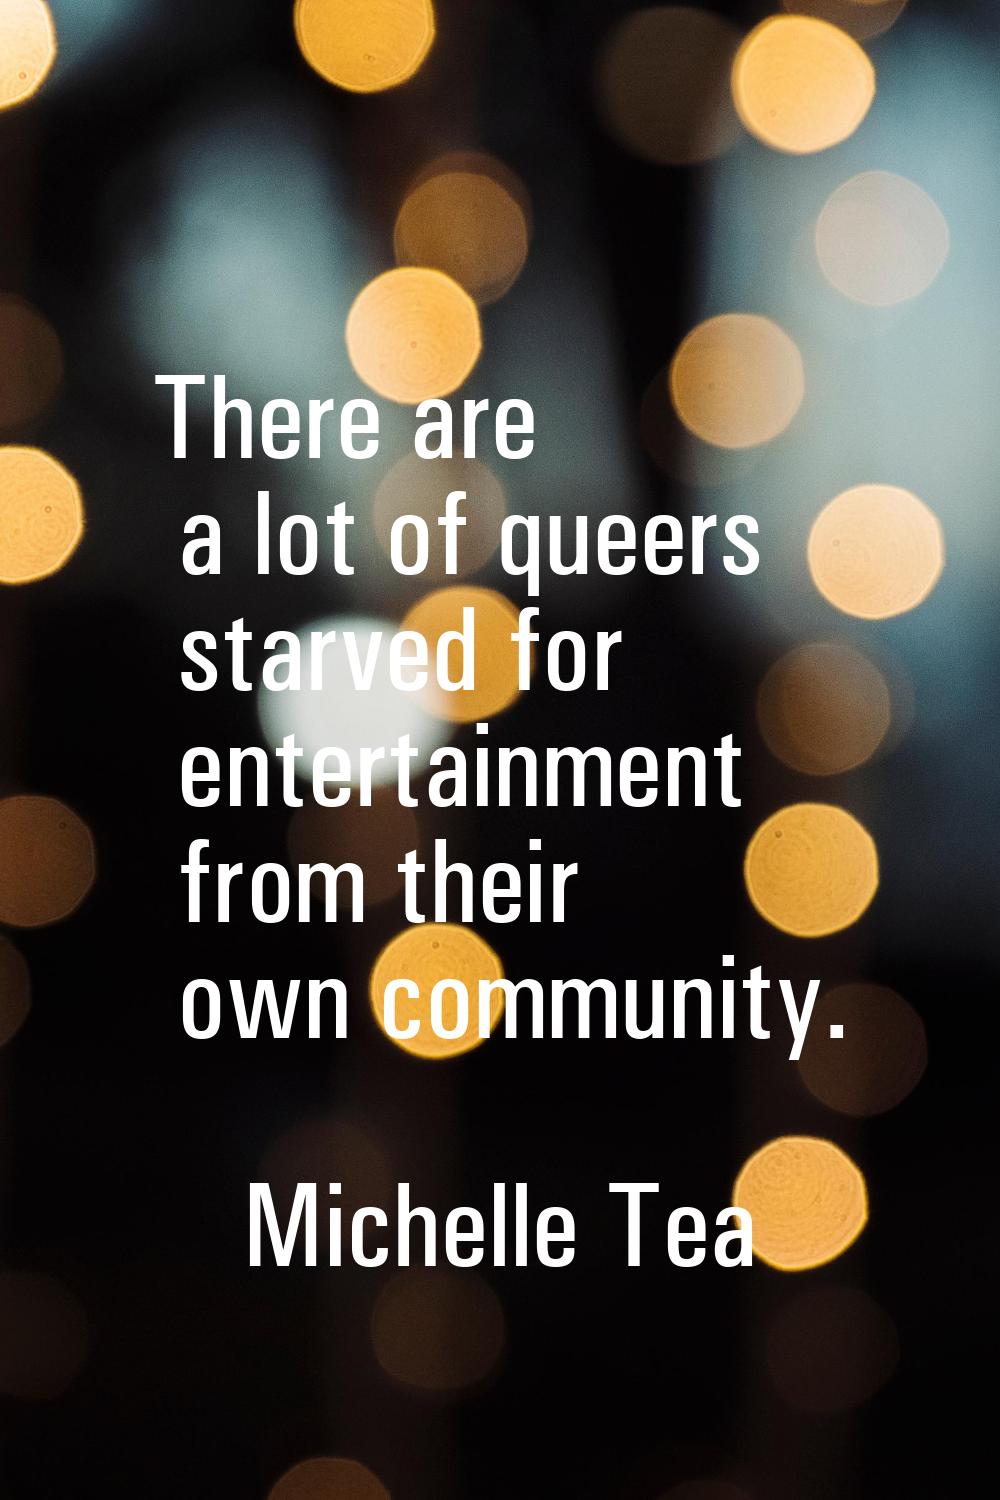 There are a lot of queers starved for entertainment from their own community.